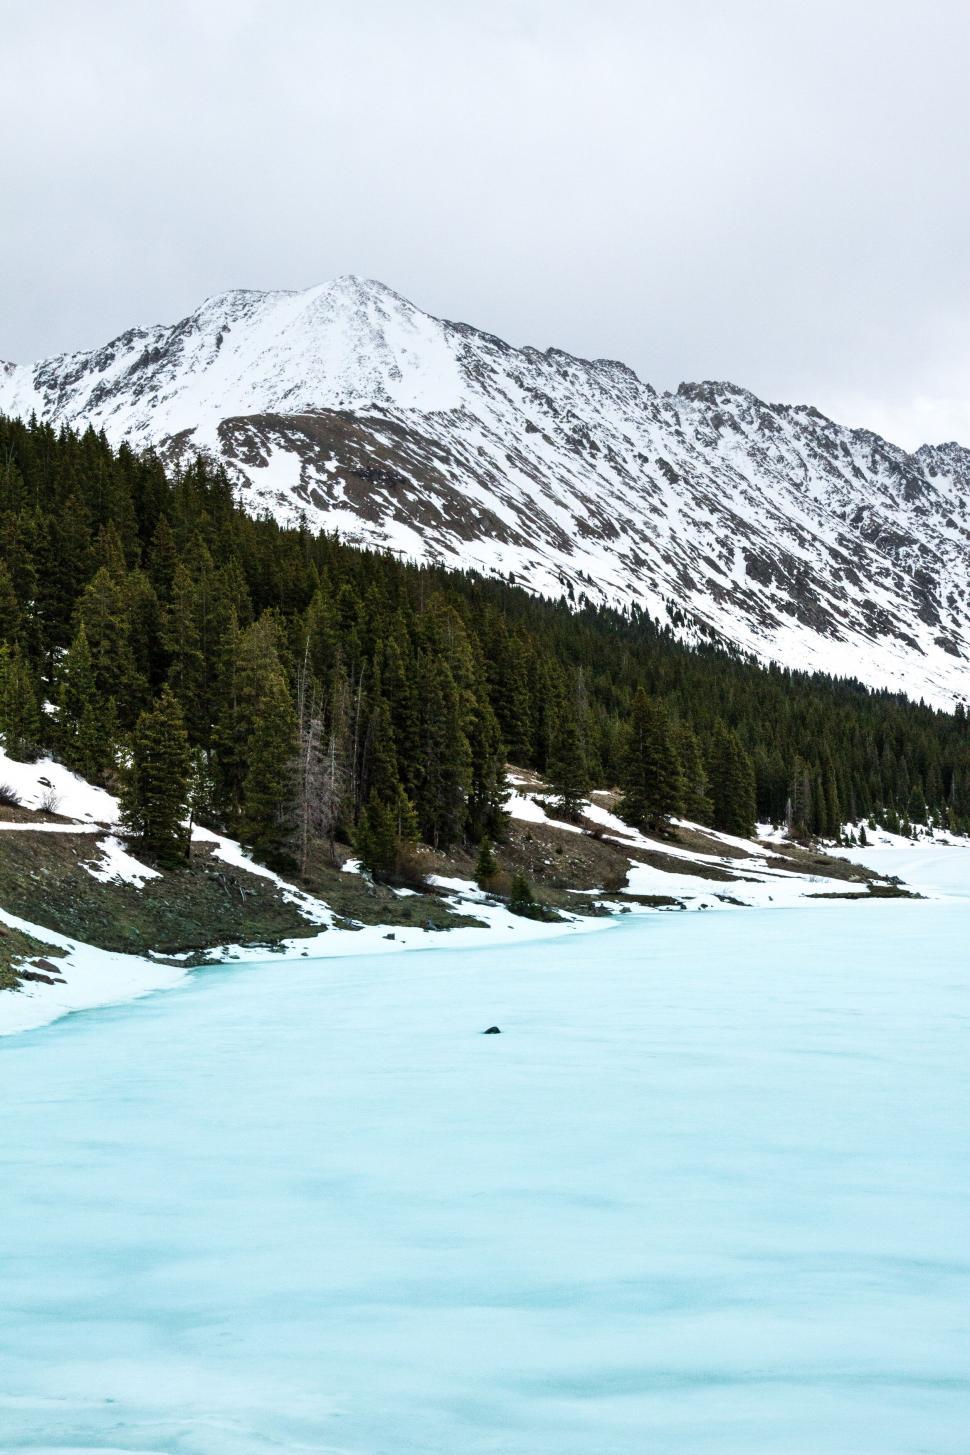 Free Image of Frozen alpine lake with snow-capped mountains 